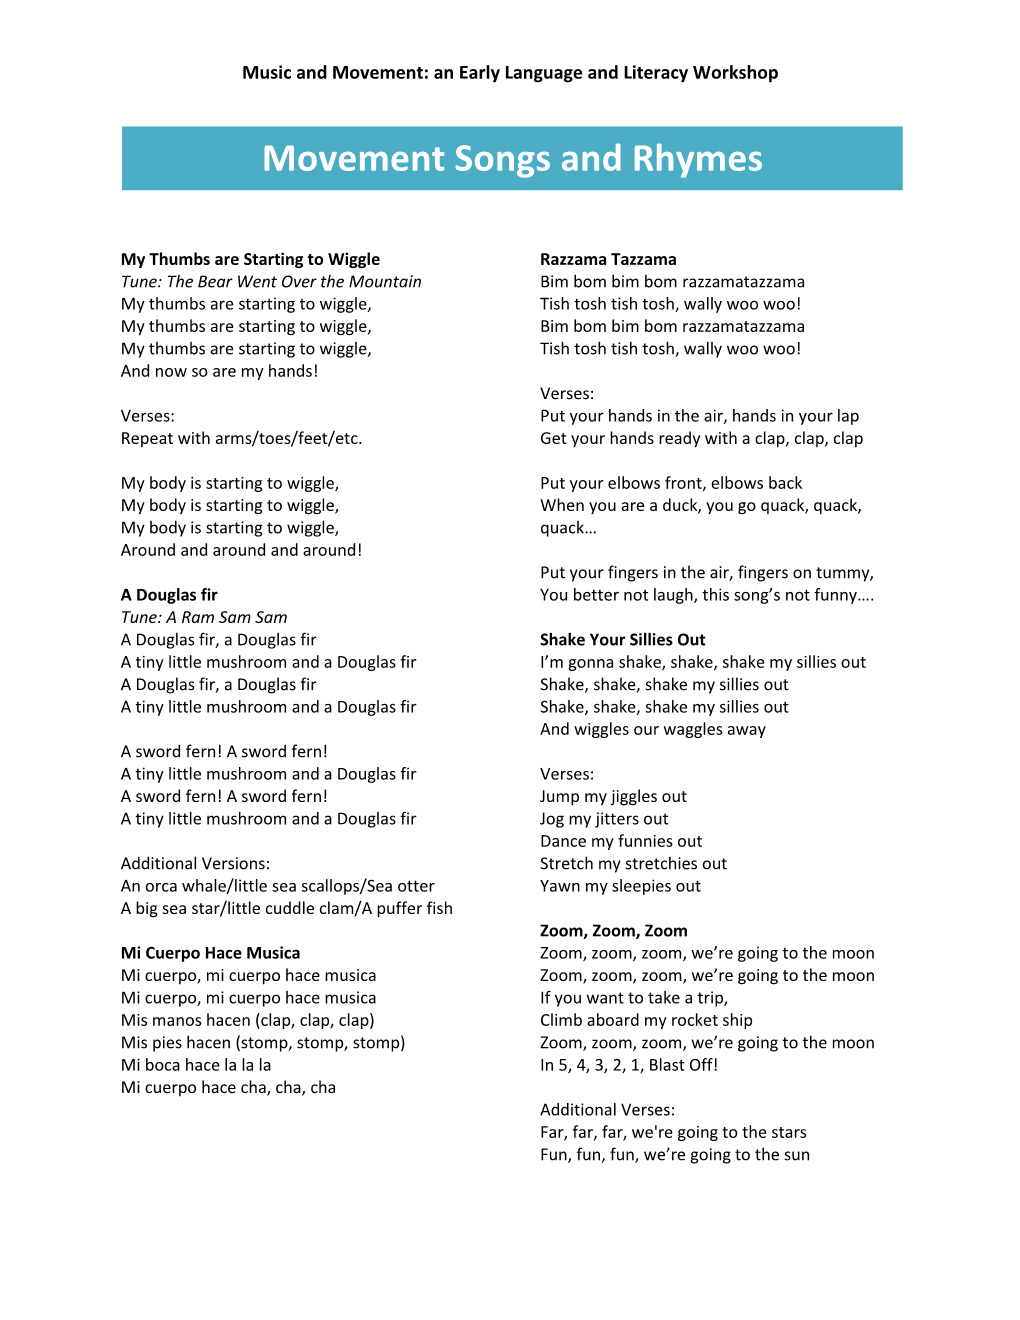 Movement Songs and Rhymes